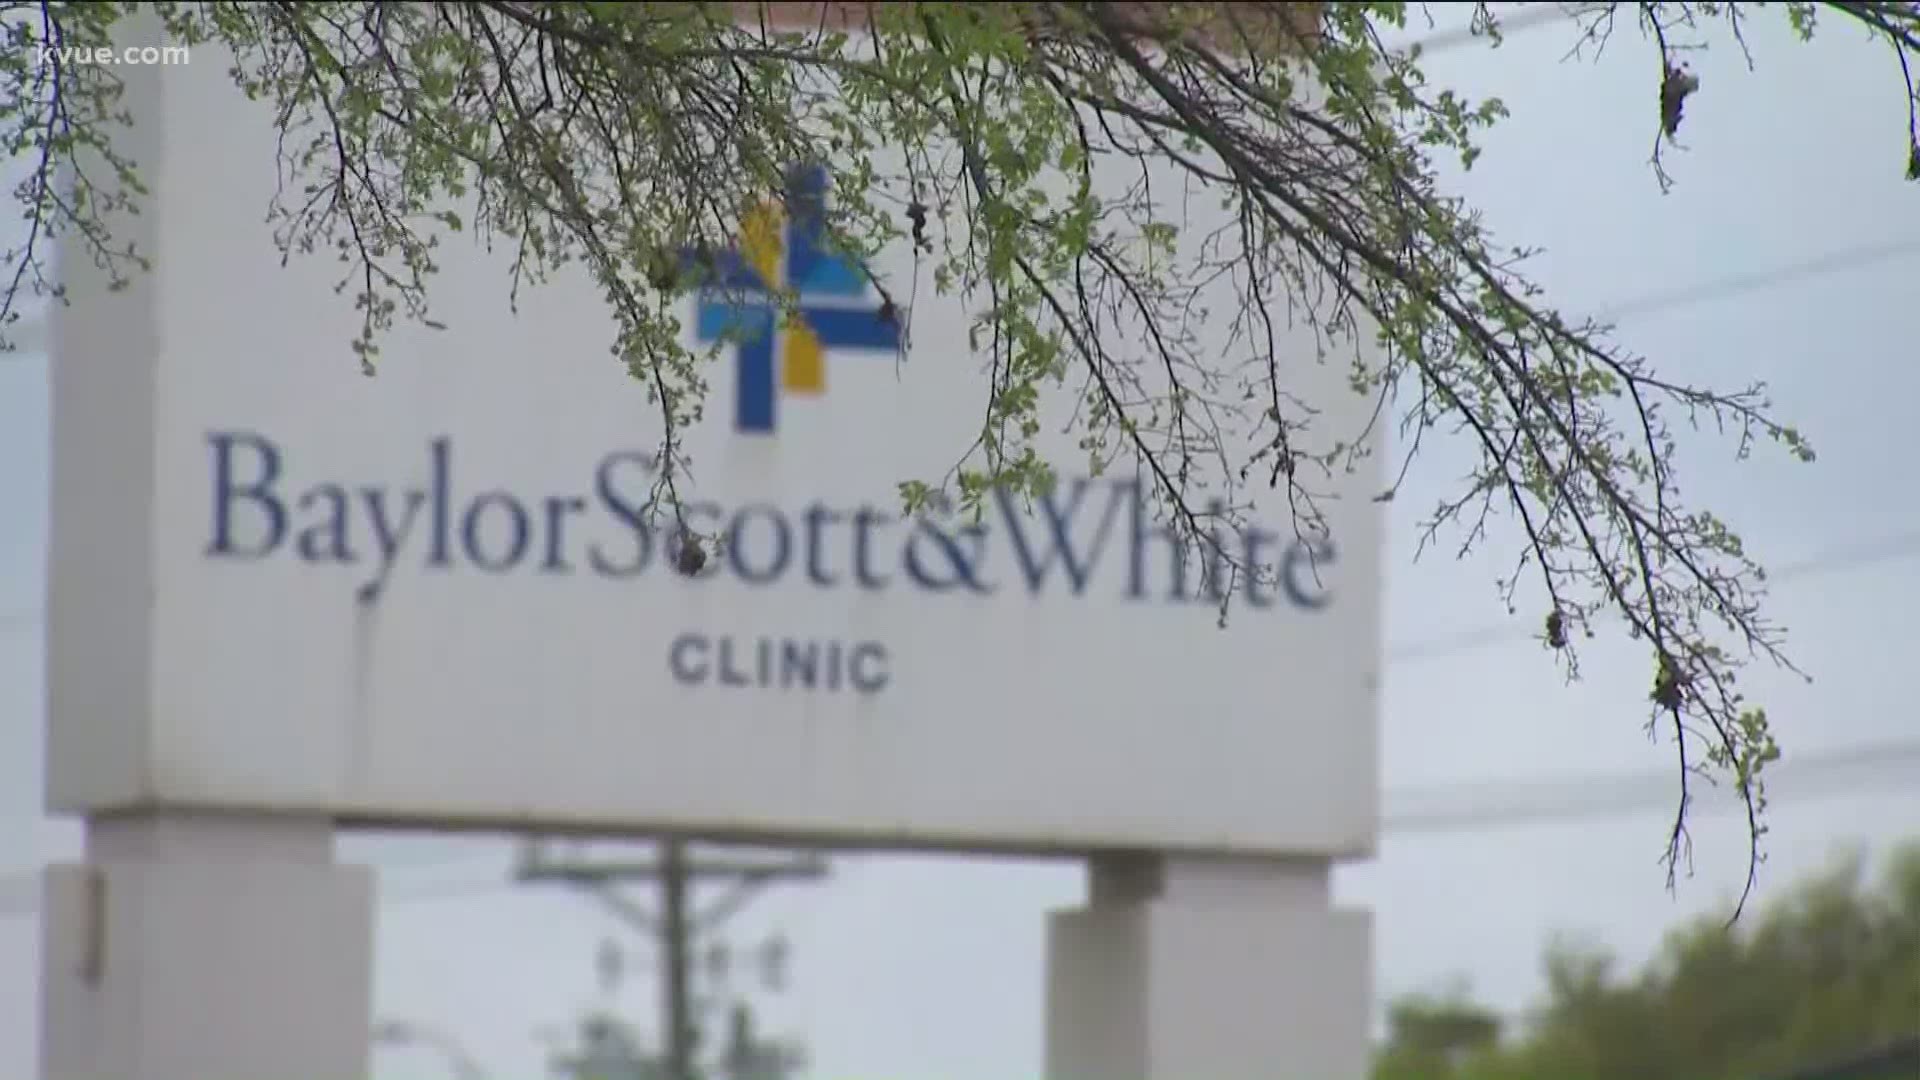 Local leaders said they are keeping an eye on hospital capacity right now, but are not to a point of concern as other leaders are around Texas.